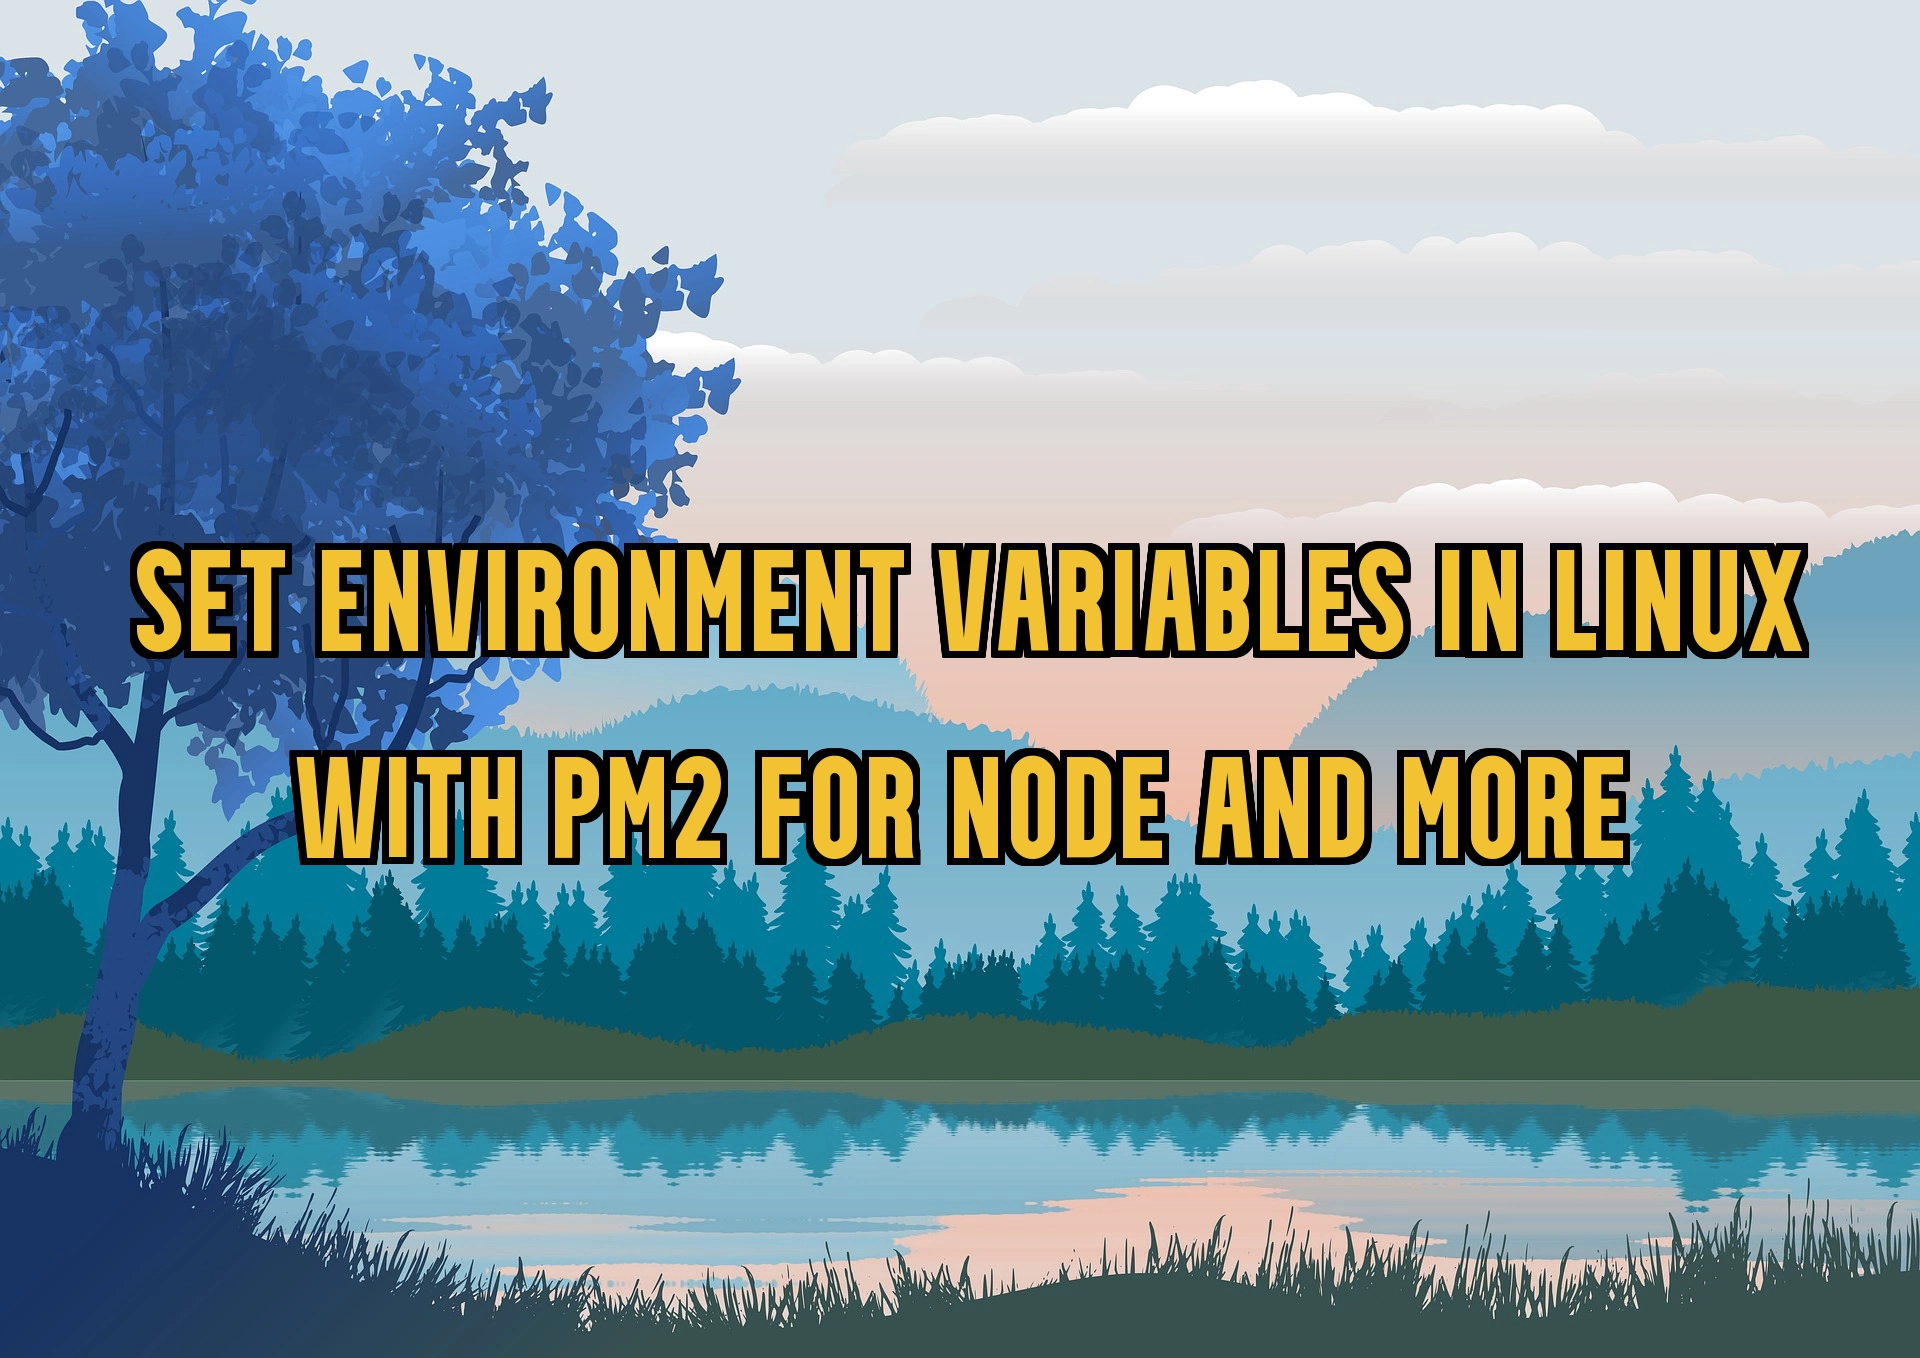 Cover Image for Set Environment Variables in LINUX with PM2 for Node and more